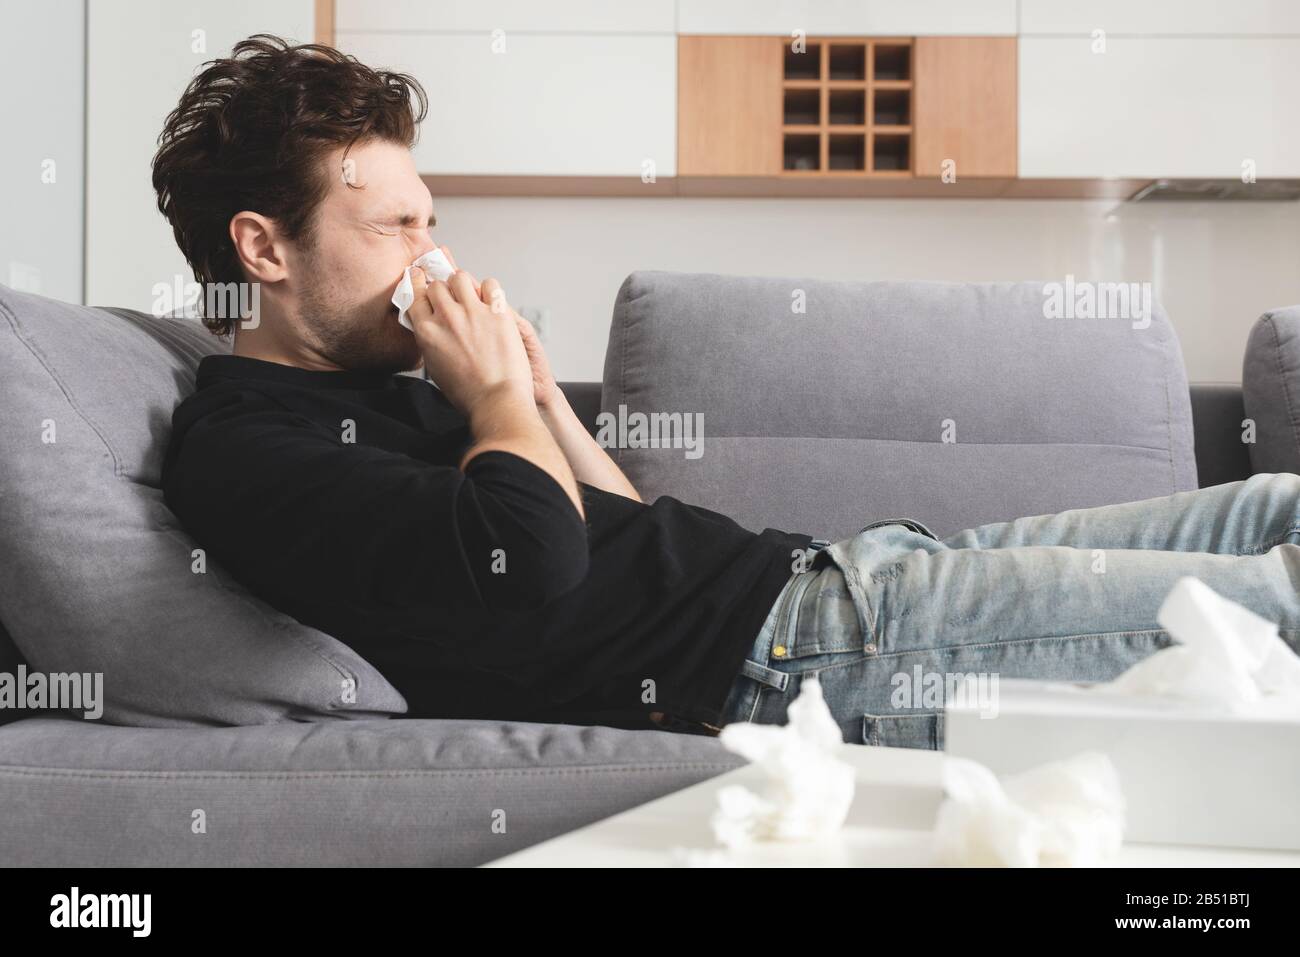 Sick man lying on sofa and blowing nose. Healthcare, disease concept Stock Photo